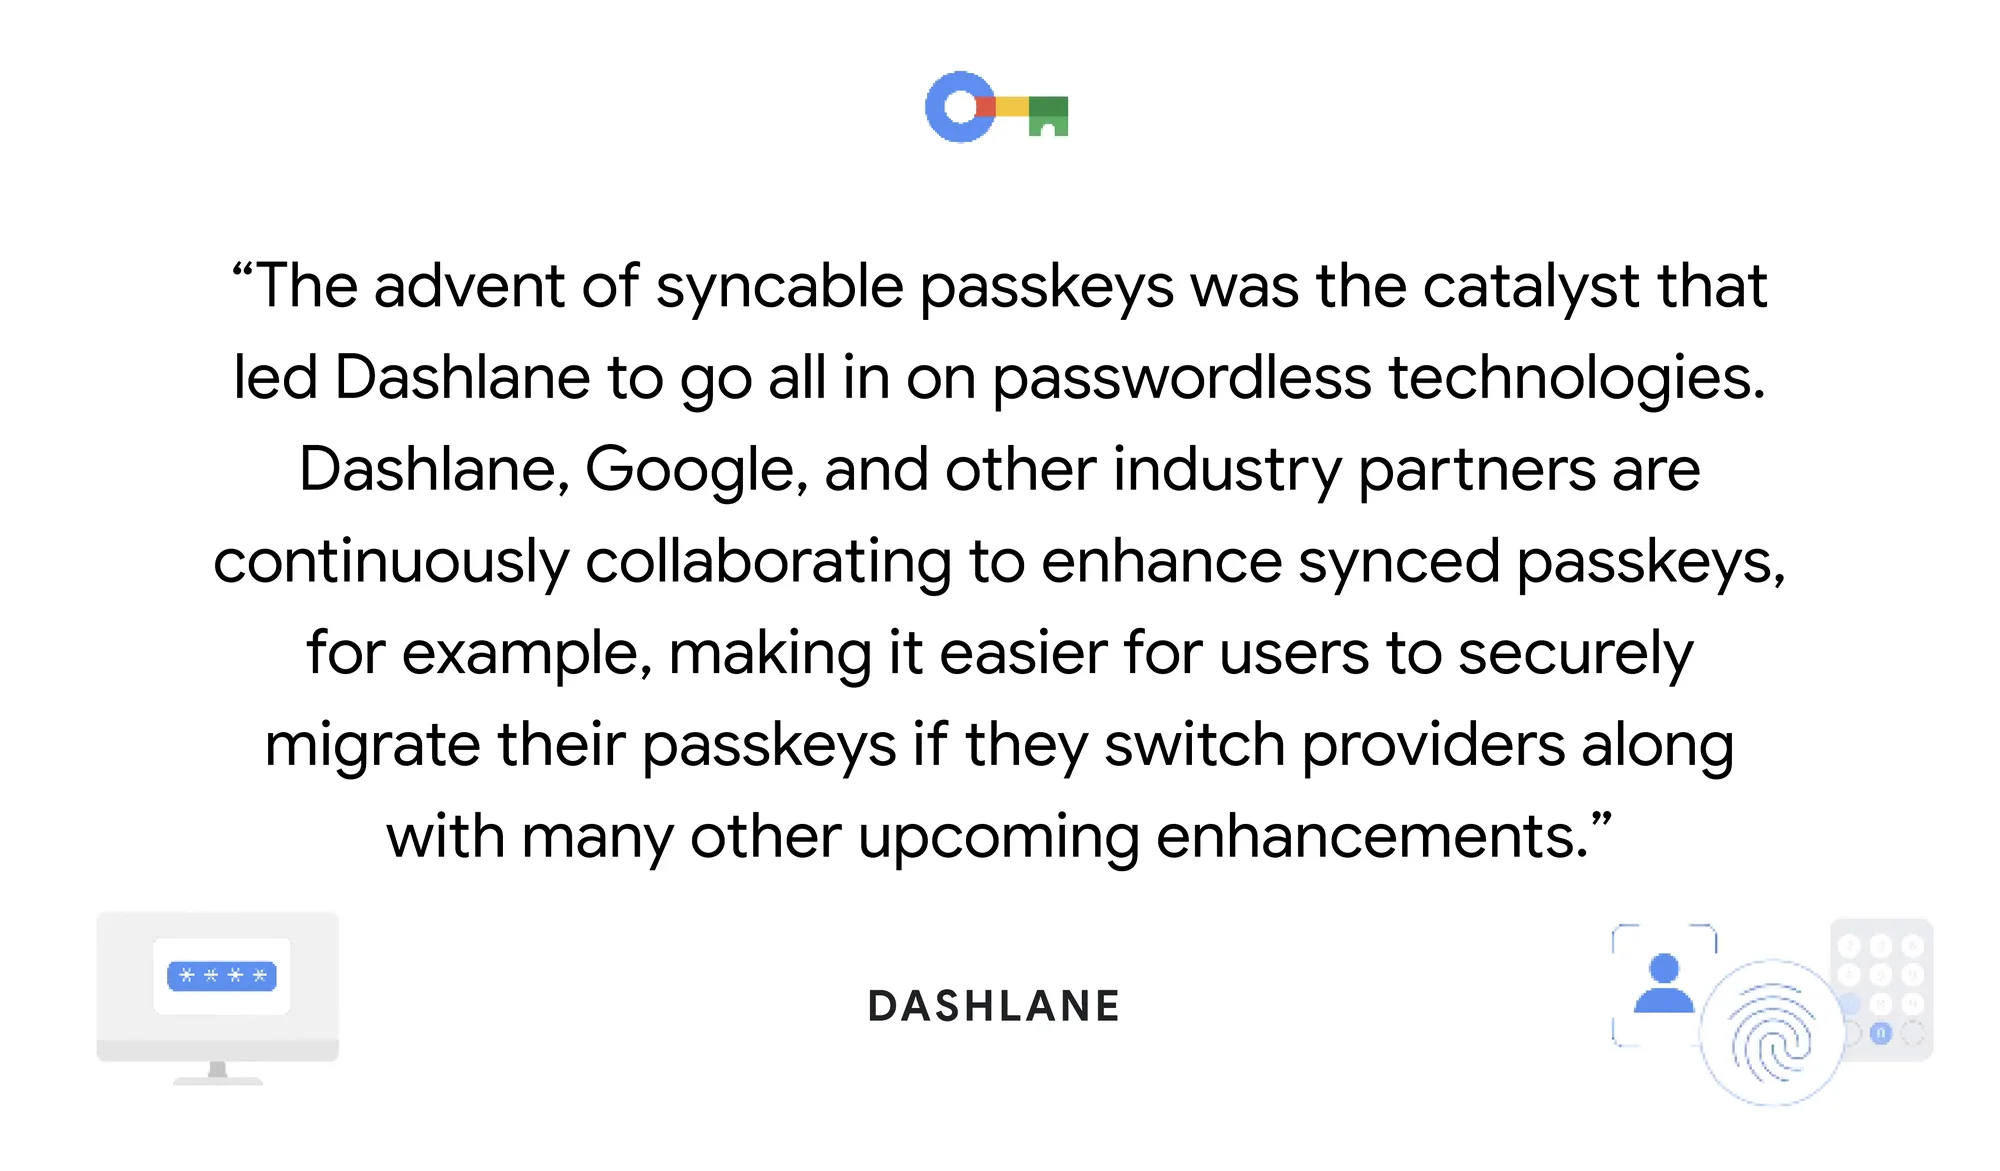 a card that says “The advent of syncable passkeys was the catalyst that led Dashlane to go all in on passwordless technologies. Dashlane, Google, and other industry partners are continuously collaborating to enhance synced passkeys, for example, making it easier for users to securely migrate their passkeys if they switch providers along with many other upcoming enhancements.” - Dashlane